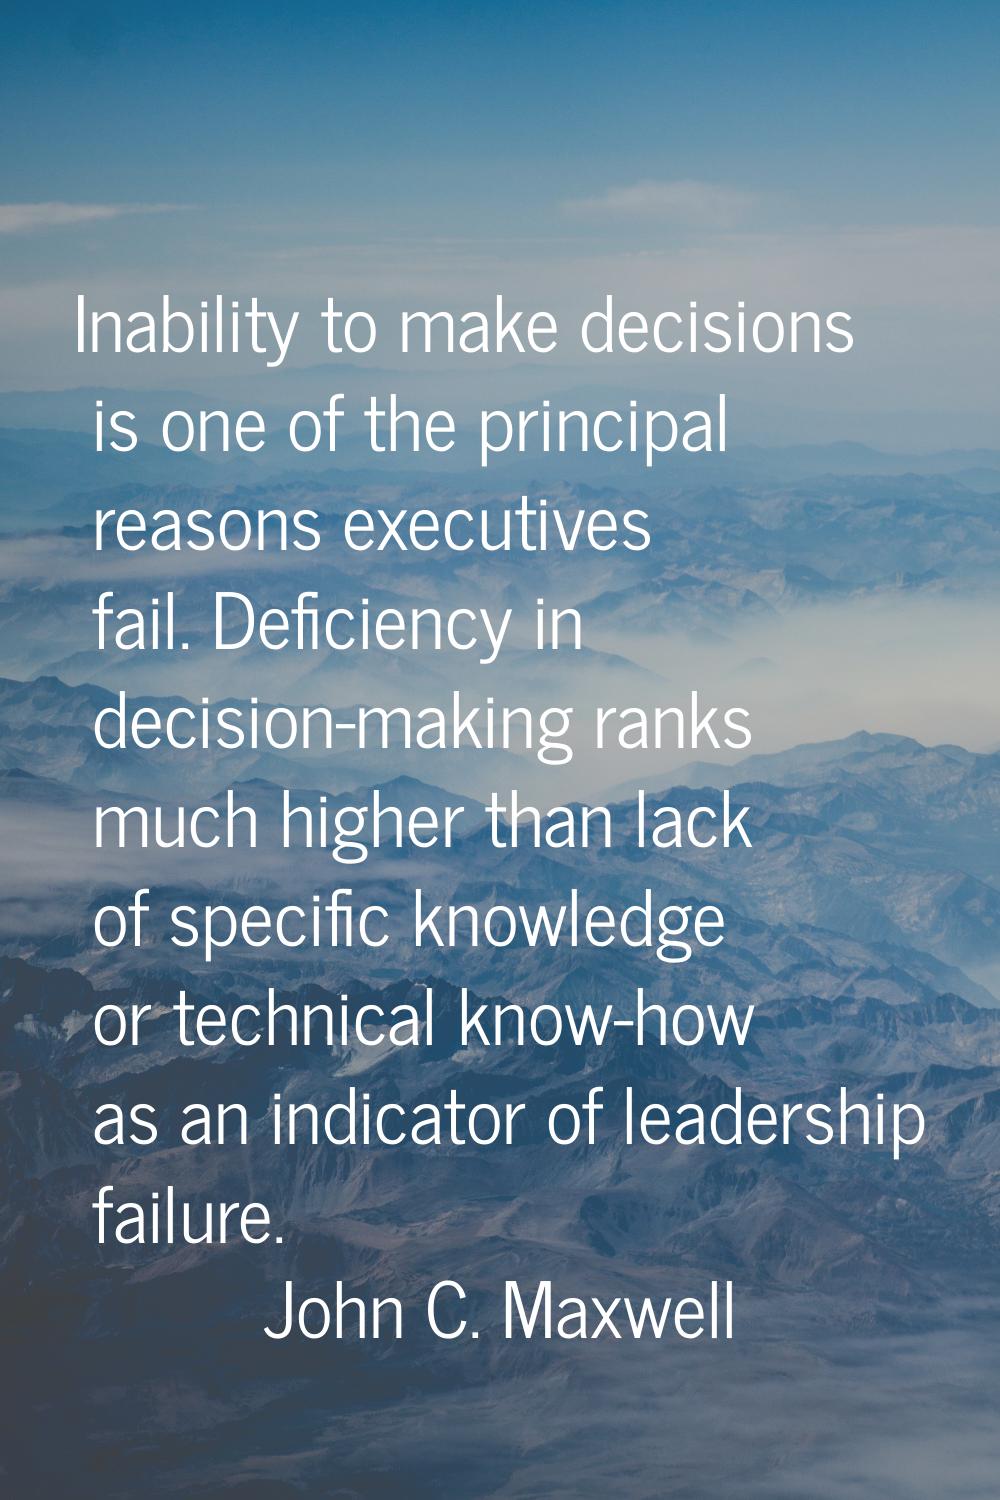 Inability to make decisions is one of the principal reasons executives fail. Deficiency in decision